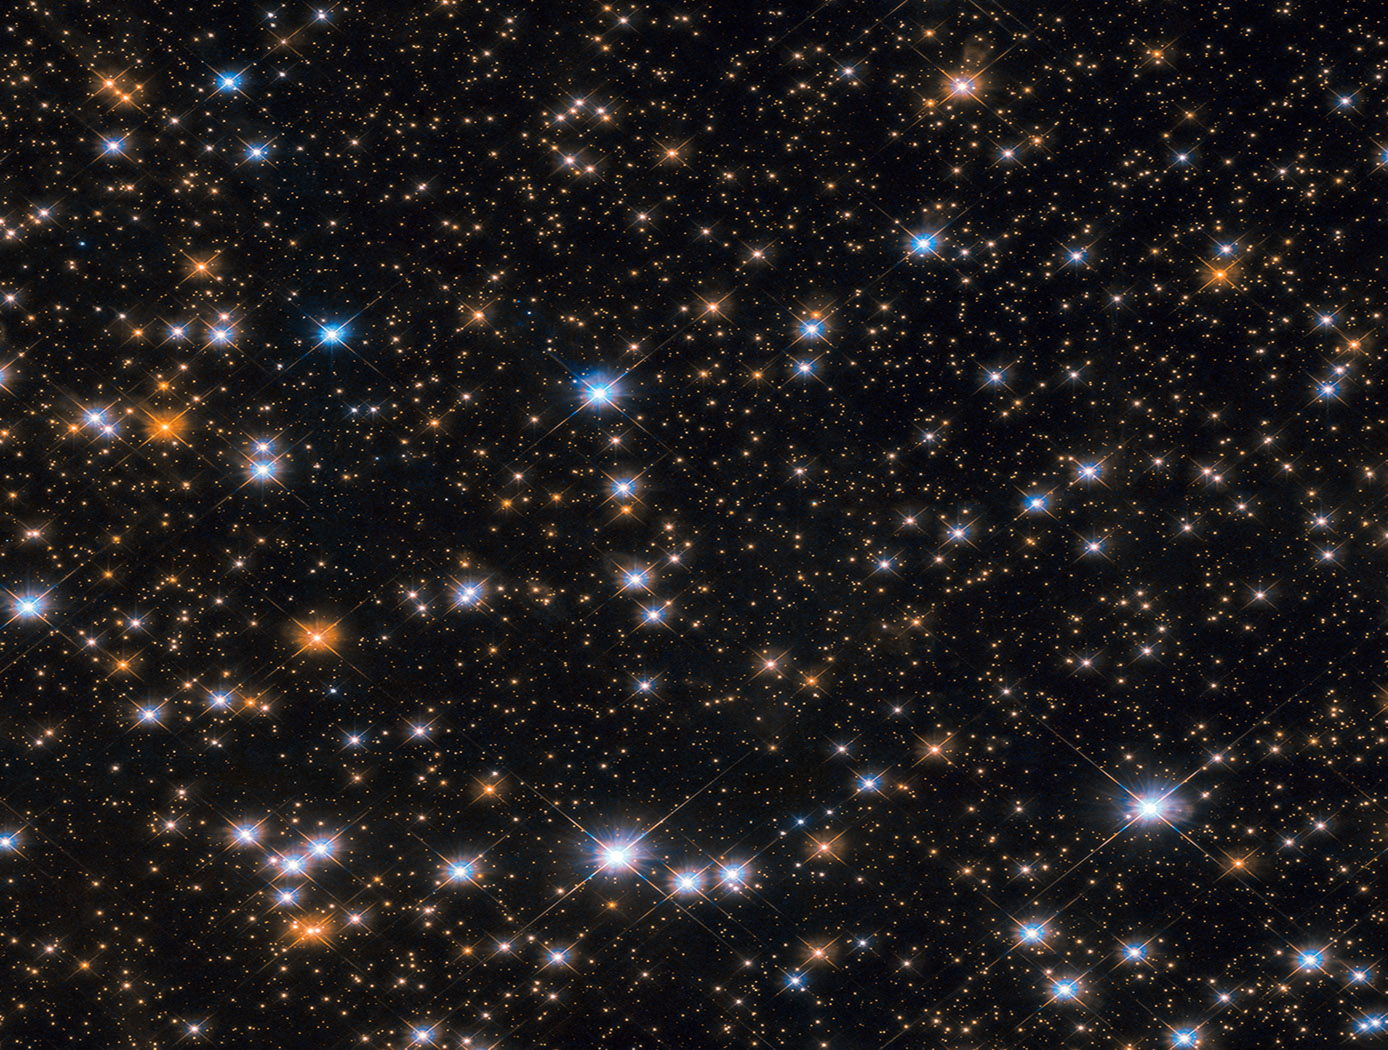 This star-studded image from NASA's Hubble Space Telescope shows us a portion of Messier 11, an open star cluster in the southern constellation of Scutum (the Shield). Messier 11 is also known as the Wild Duck Cluster, as its brightest stars form a V shape that somewhat resembles a flock of ducks in flight. Messier 11 is one of the richest and most compact open clusters currently known. By investigating the brightest, hottest main sequence stars in the cluster, astronomers estimate that it formed roughly 220 million years ago. Open clusters tend to contain fewer and younger stars than their more compact globular cousins, and Messier 11 is no exception: at its center lie many blue stars, the hottest and youngest of the clusters few thousand stellar residents. The lifespans of open clusters are also relatively short compared to those of globular ones; stars in open clusters are spread farther apart and are thus not as strongly bound to each other by gravity, causing them to be more easily and quickly drawn away by stronger gravitational forces. As a result, Messier 11 is likely to disperse in a few million years as its members are ejected one by one, pulled away by other celestial objects in the vicinity.